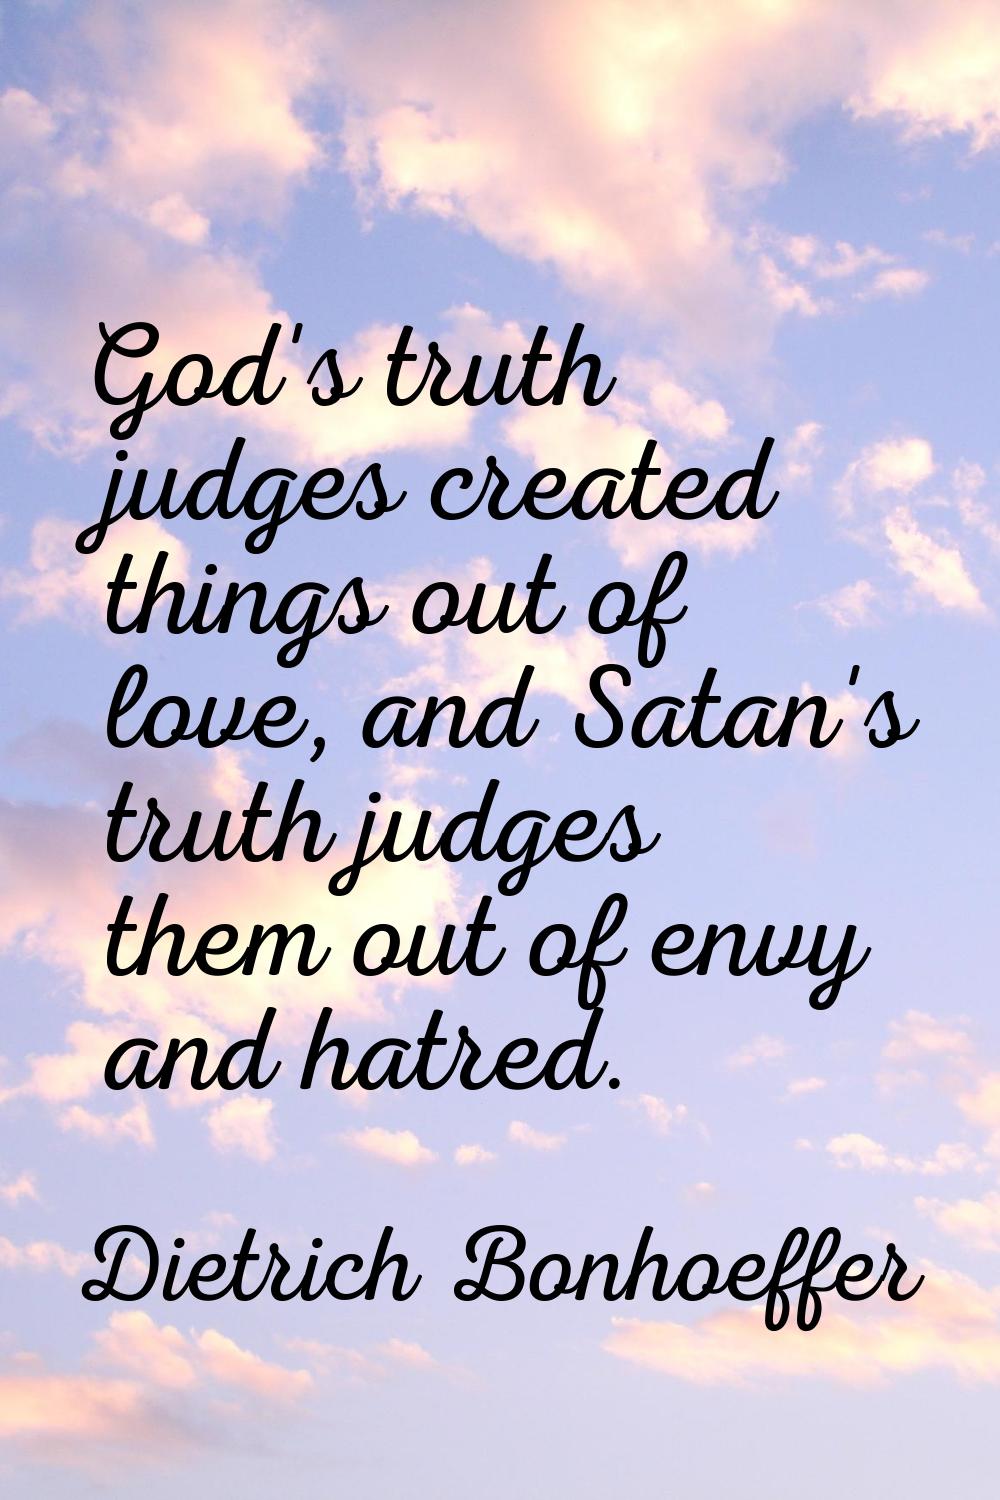 God's truth judges created things out of love, and Satan's truth judges them out of envy and hatred